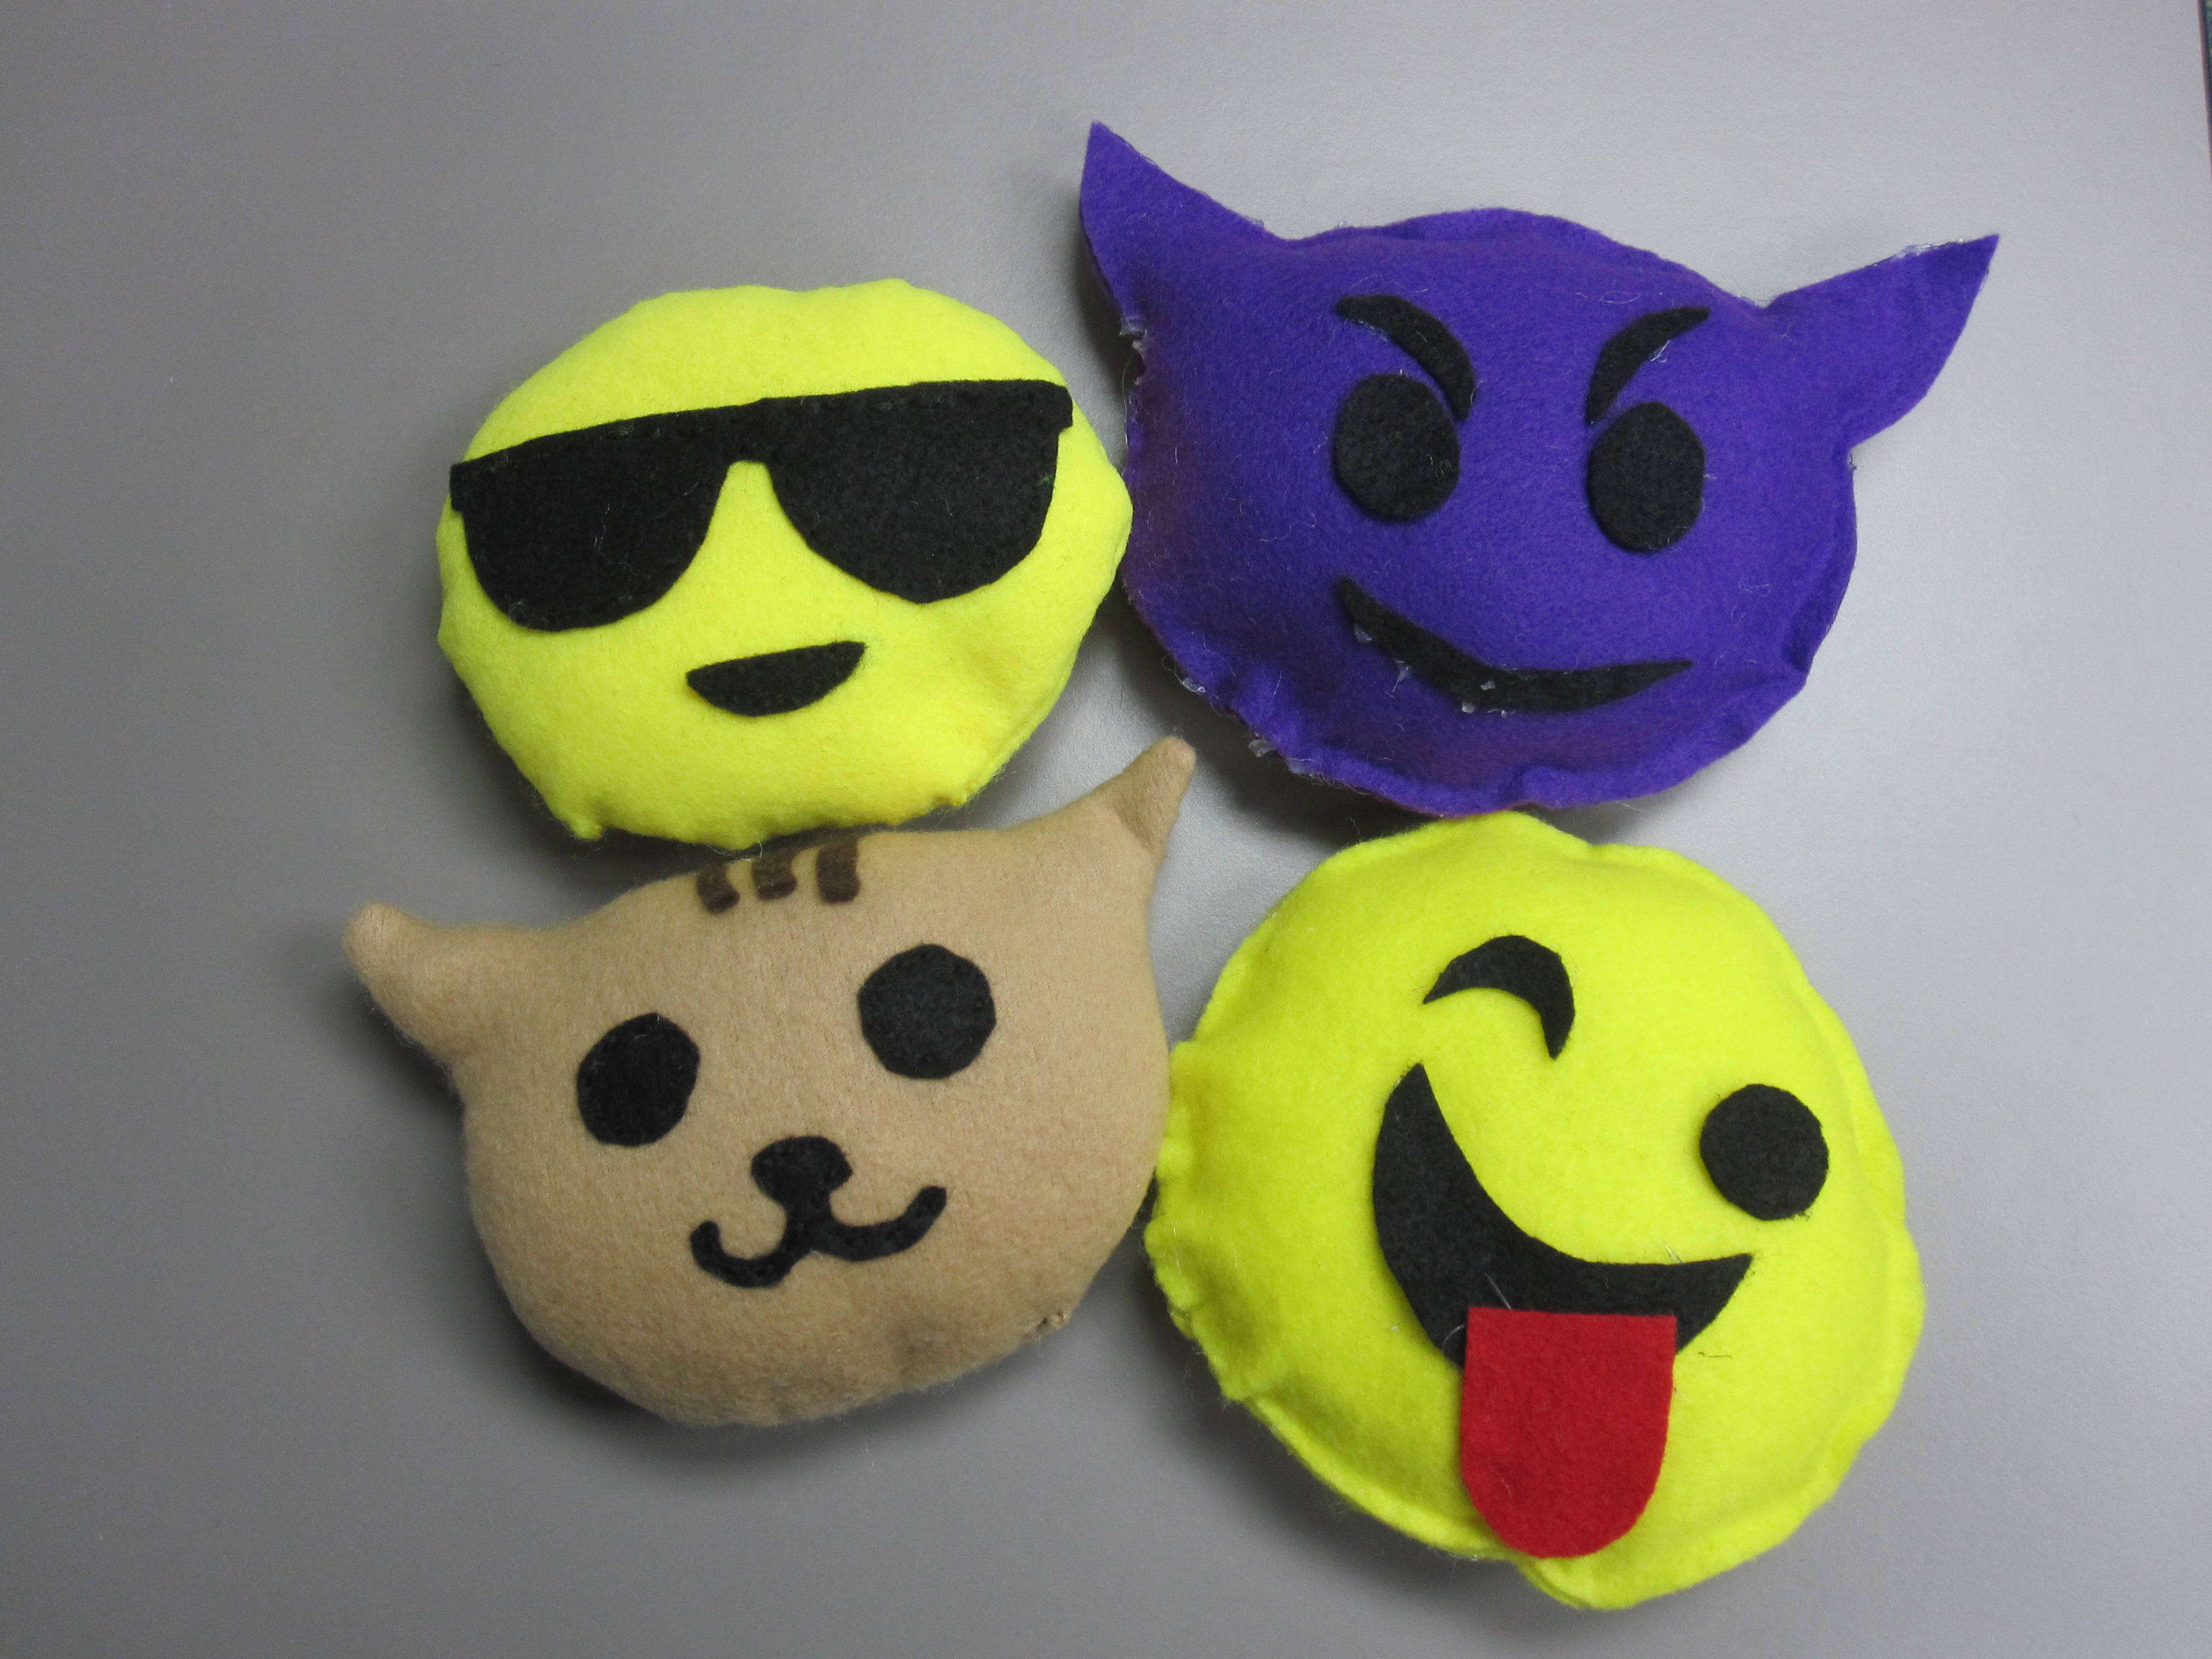 yellow emoji feltie with sunglasses, purple emoji with horns, brown cat emoji, and yellow emoji with tongue sticking out